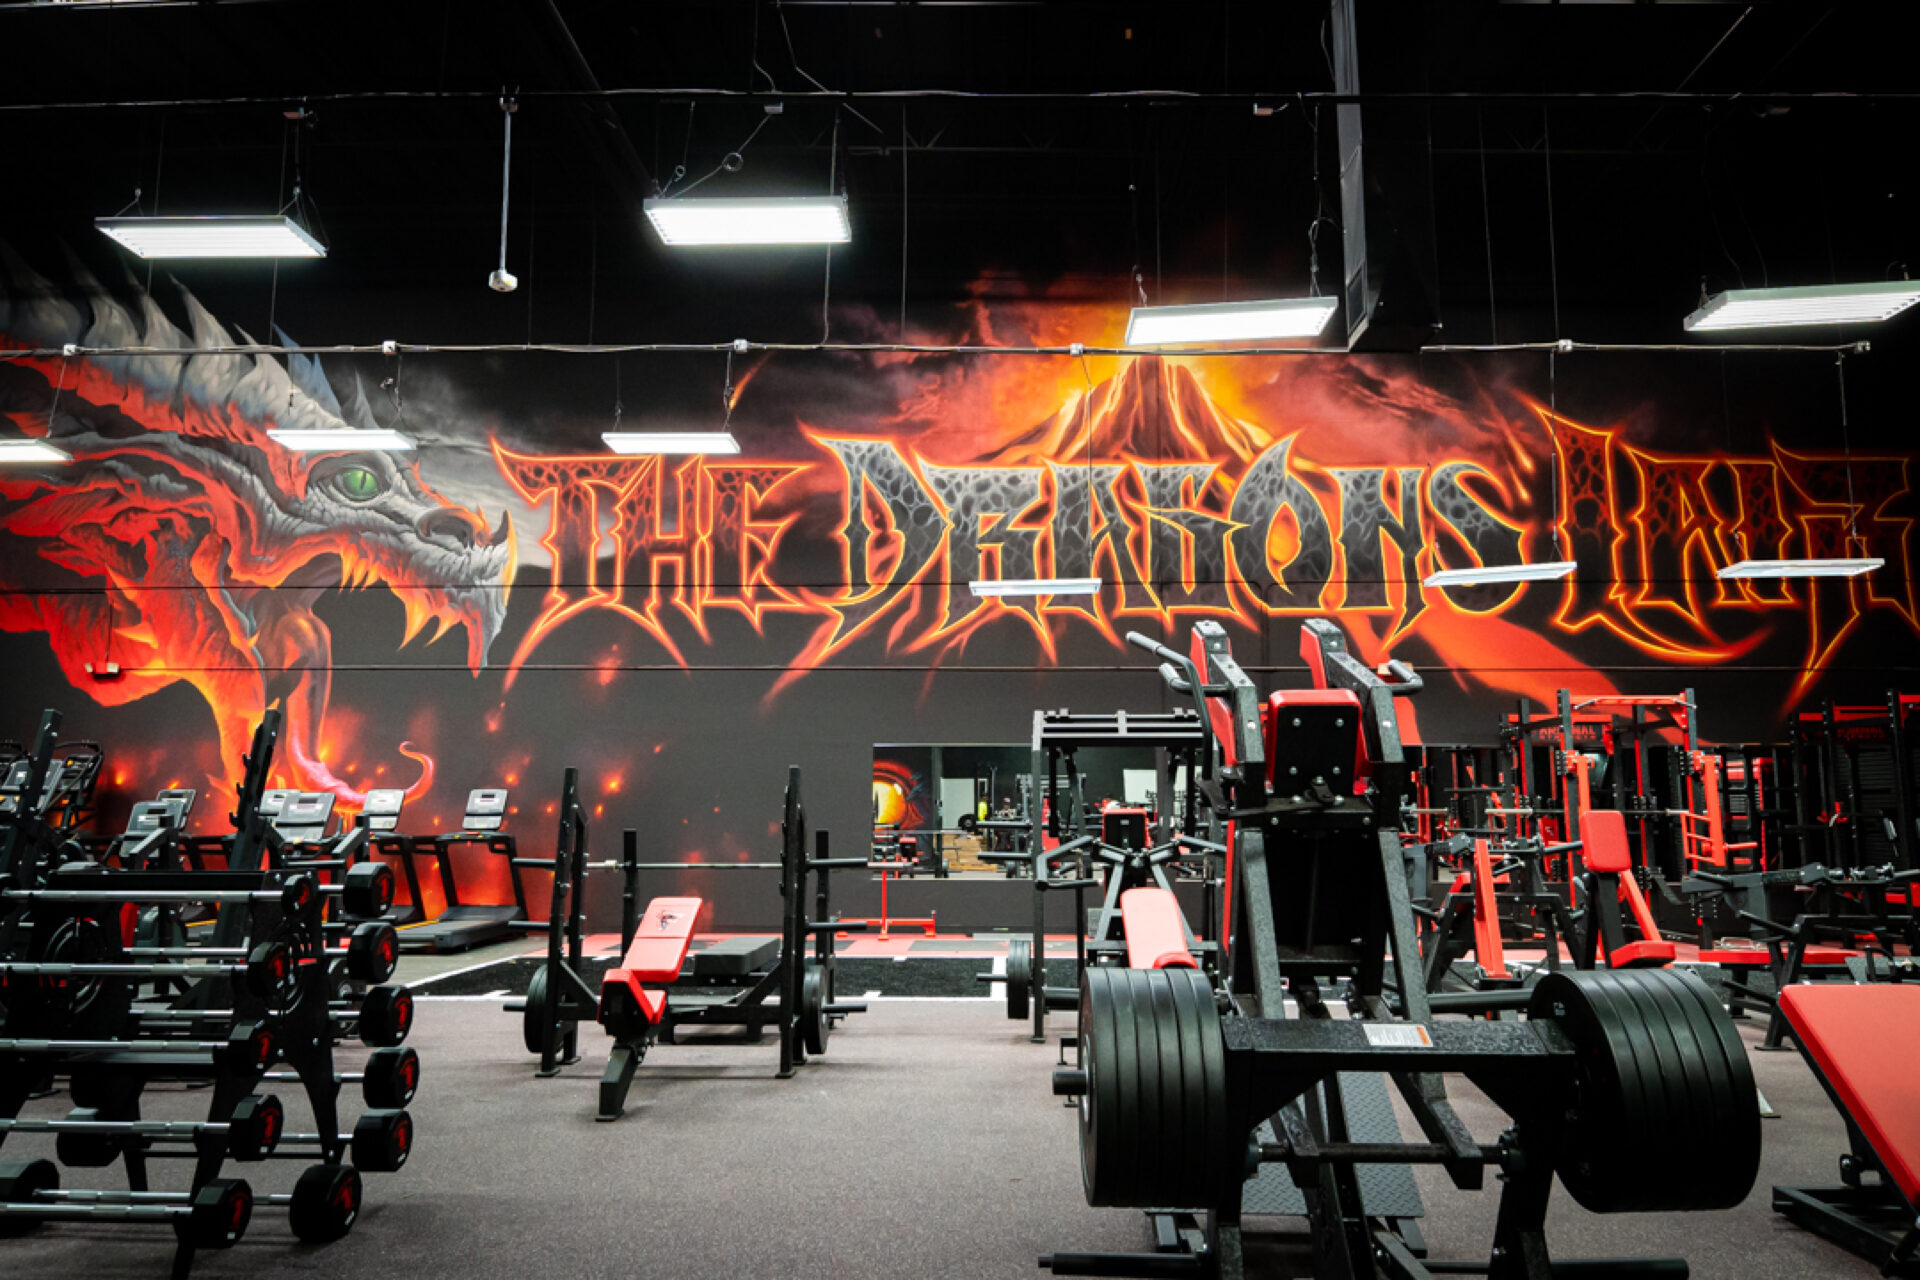 Bodybuilding Greats Celebrate Opening of Flex Lewis' Dragon's Lair Gym